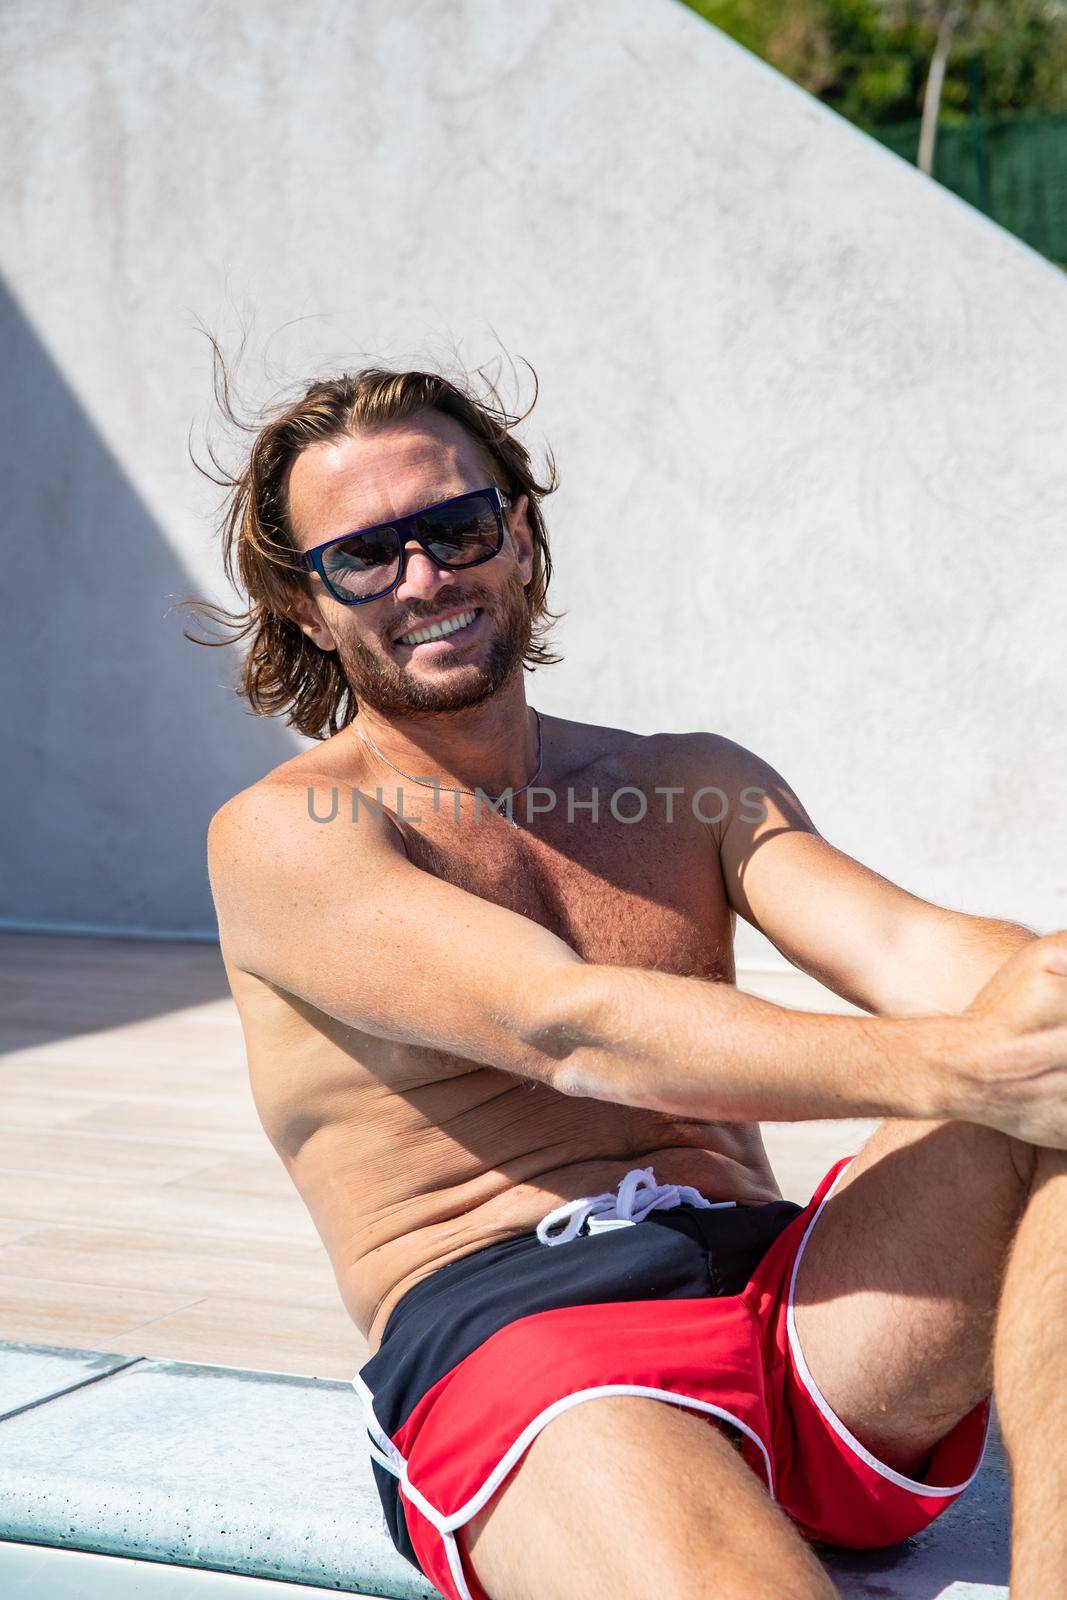 The handsome brutal man in sunglasses with a long hair and naked torso sits near the pool, is looking a camera, big smile, a sports suntanned body, sunglasses with a blue frame, sunny